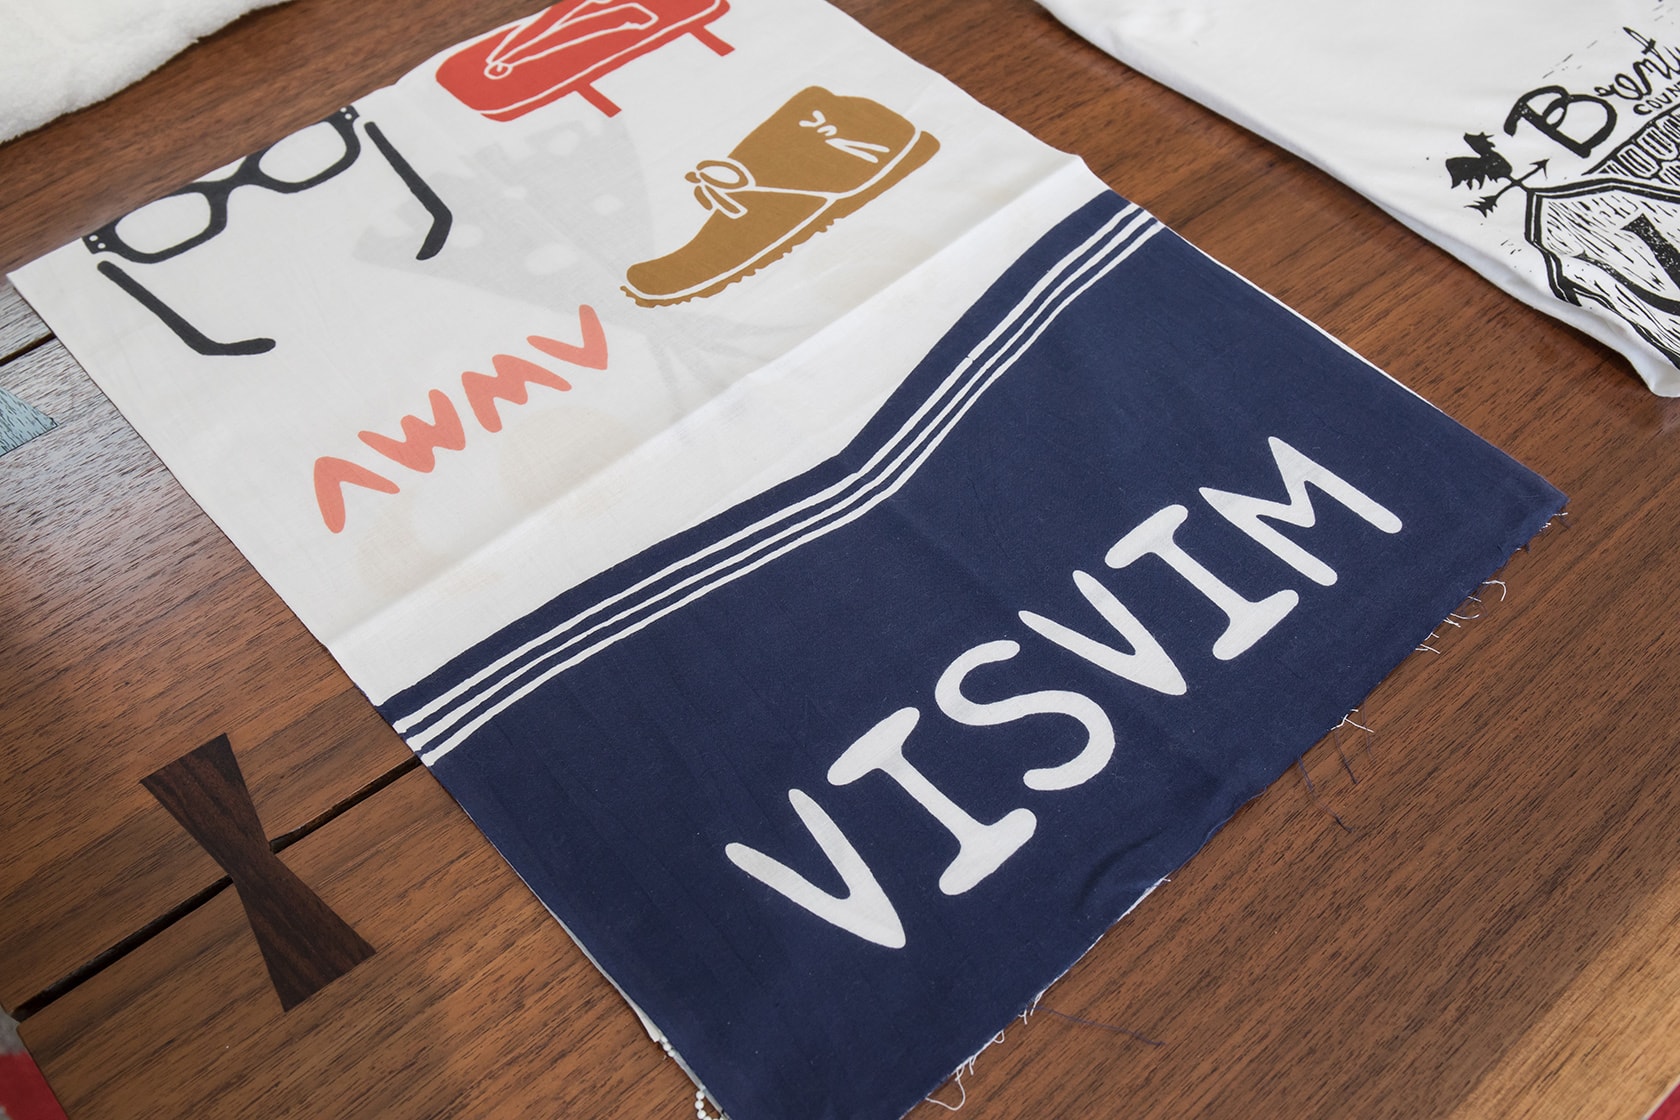 WMV visvim Brentwood Pop-Up Store Open Now Shop Clothing Accessories Tote Bags Shoes Trainers Kicks Sneakers